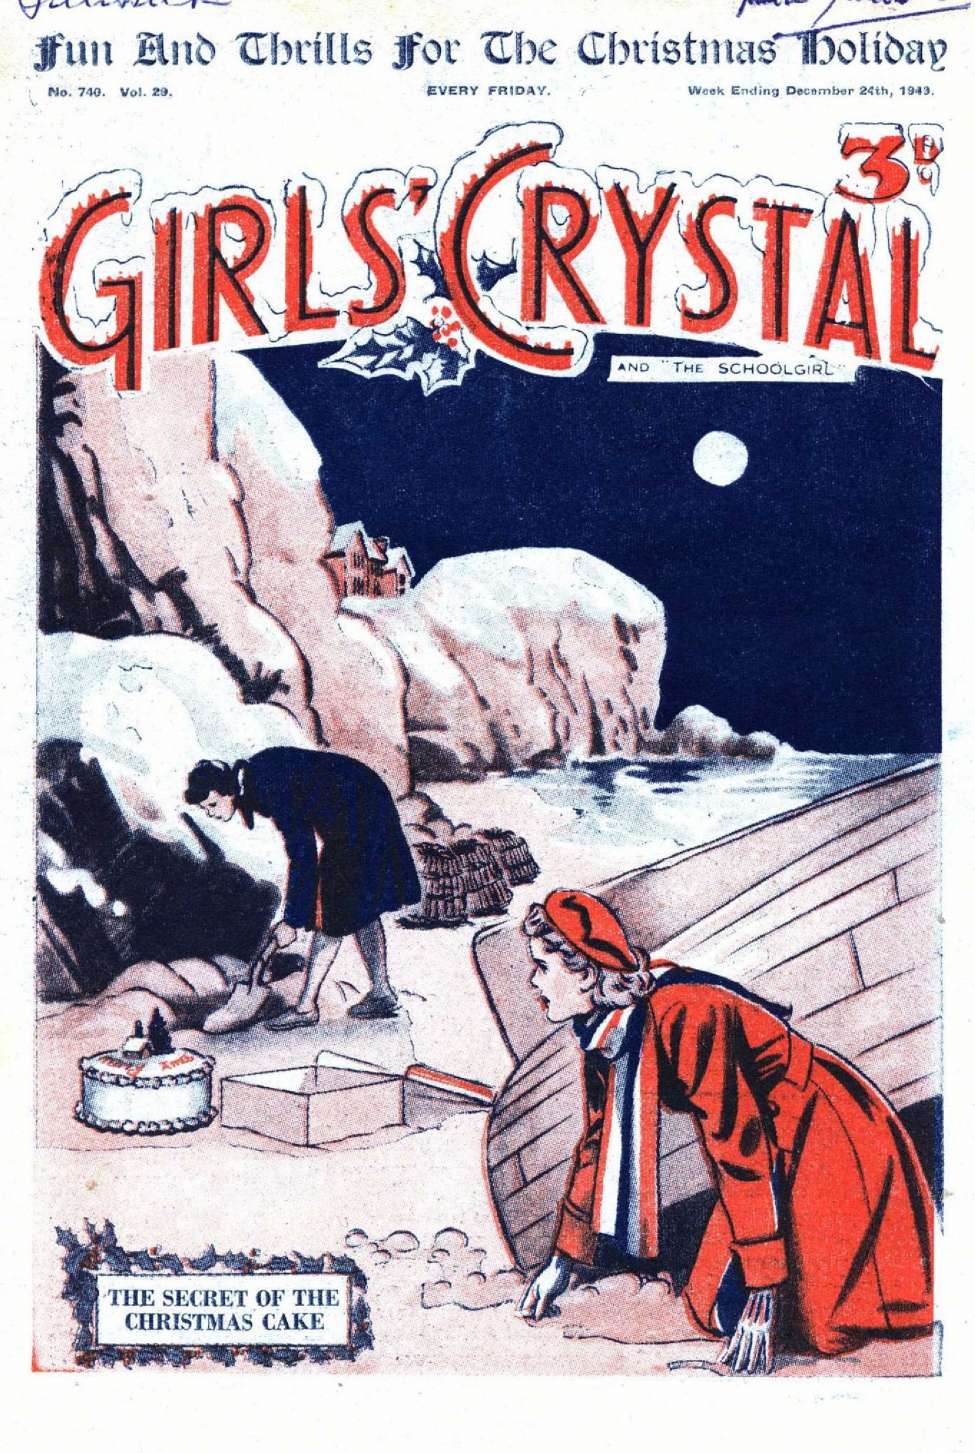 Comic Book Cover For Girls' Crystal 740 - The Secret of the Christmas Cake